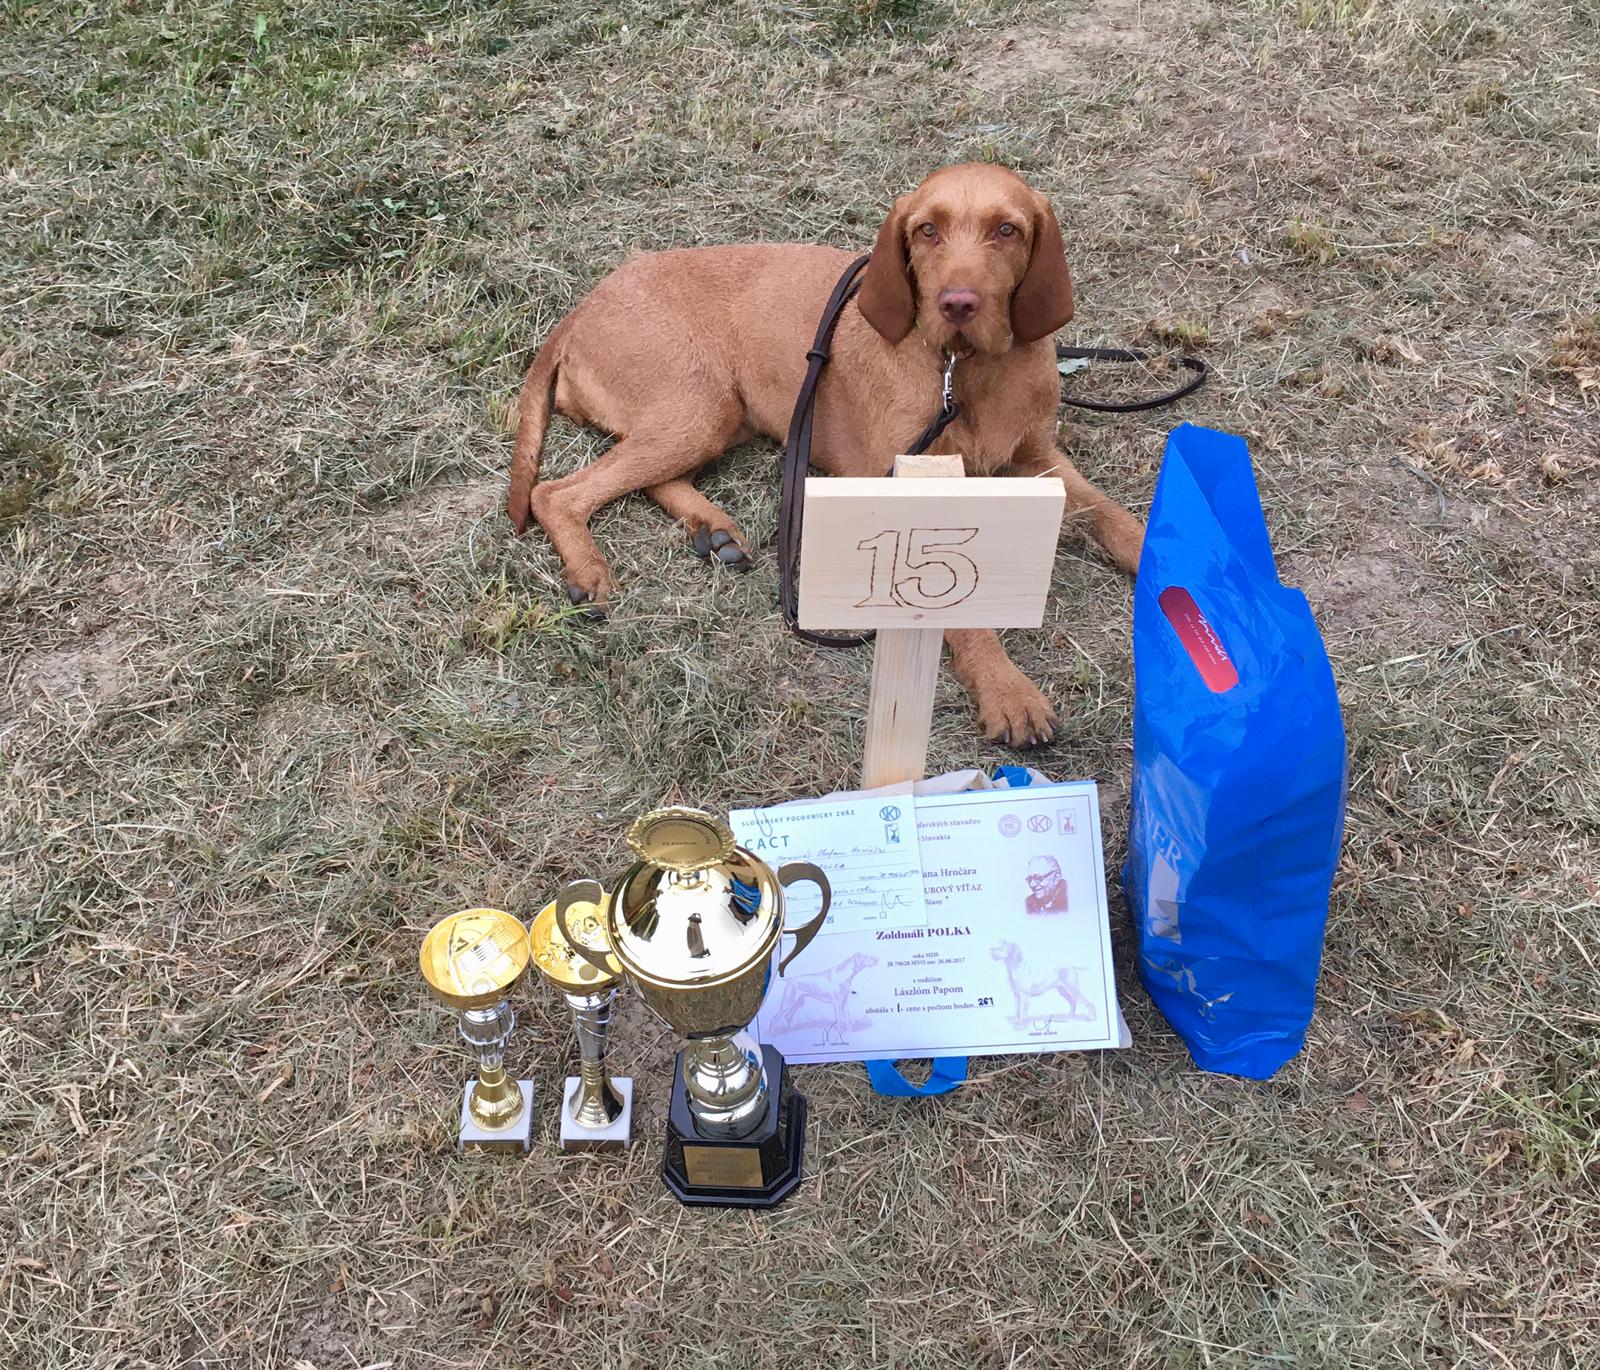 Polka got CACT, 1st prize, 3rd place on the SHM CACIT Field and Water Competition